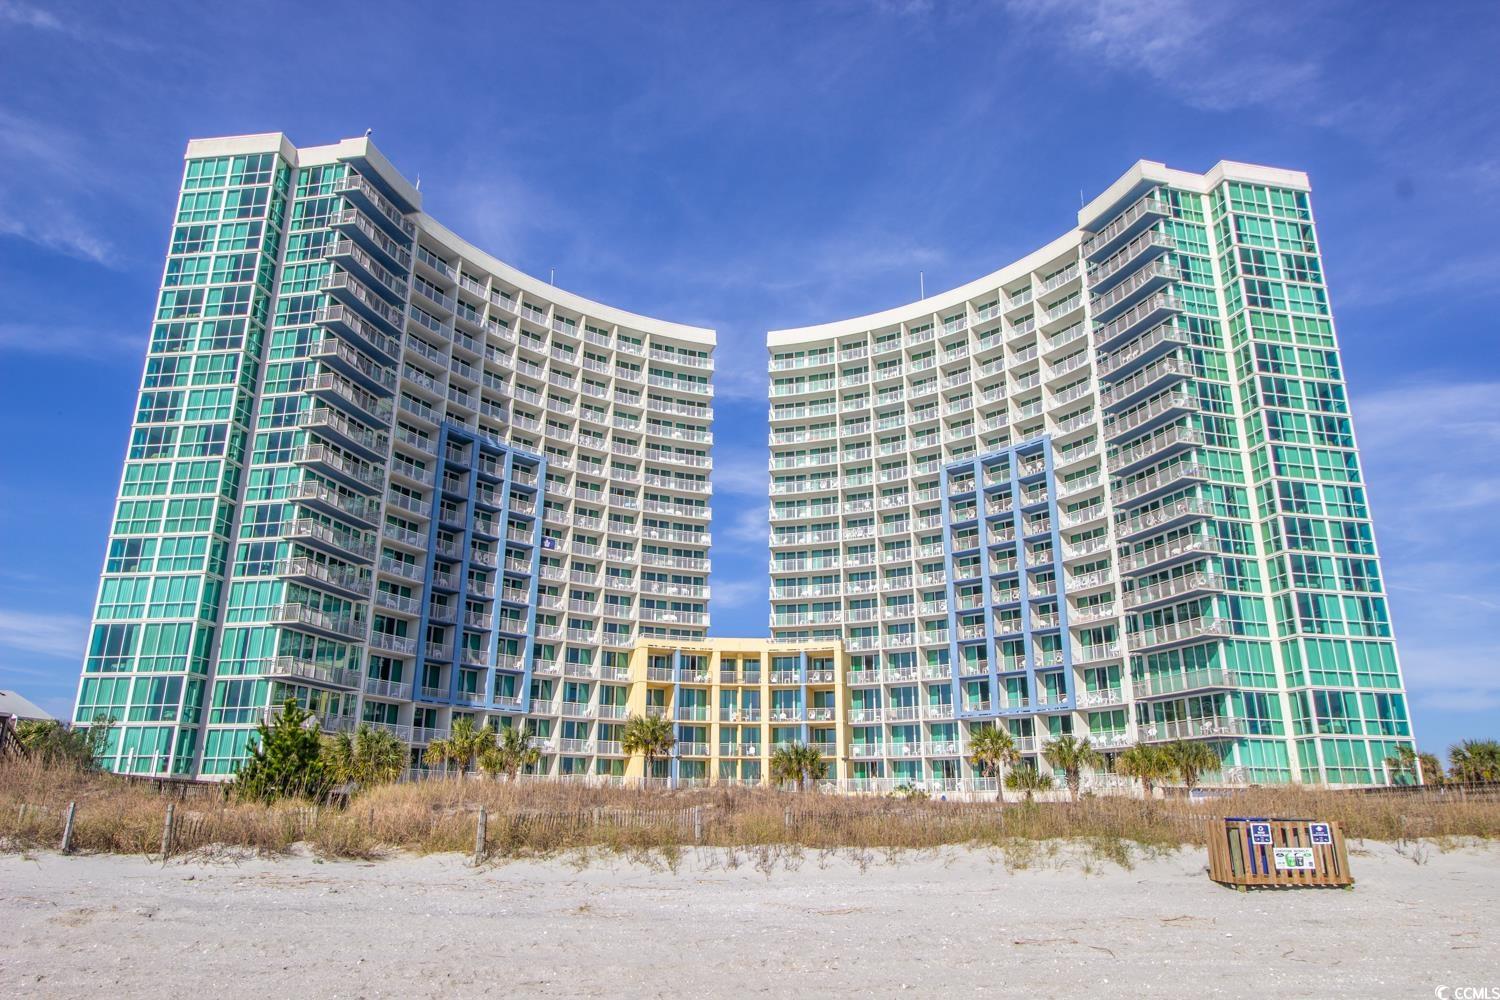 amazing 16th floor oceanfront, 2br/2ba, the "f" layout is the 2nd largest 2br/2ba oceanfront condo with the oceanfront primary bedroom in the popular avista resort. the 16th and 17th floors offer 10ft ceilings for a spacious open feel. granite countertops in the kitchen, bath and the condo has been fully updated bedding, tv's, you name it! accommodations for 8 guests. the avista resort is one of north myrtle beach's best locations, just a couple blocks from main st.. enclosed corridors, a full service restaurant, bar, fitness center, and conference rooms really maximize rentals. this is an outstanding layout and a condo that is in tip top shape. jump on it now for the big spring and summer income.